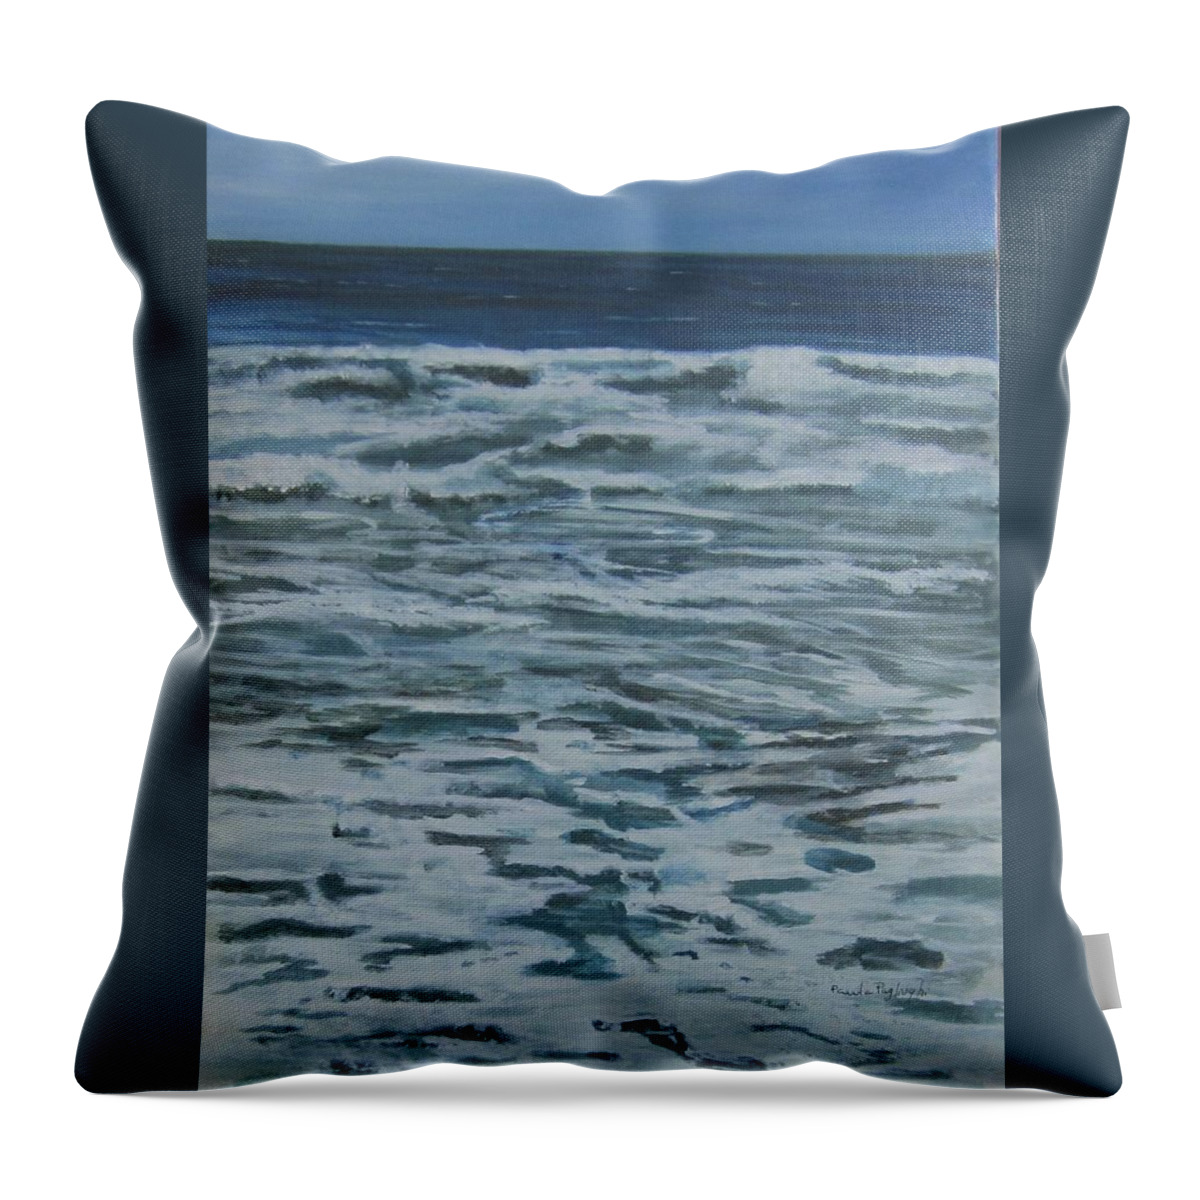 Painting Throw Pillow featuring the painting Ocean, Ocean and More Ocean by Paula Pagliughi